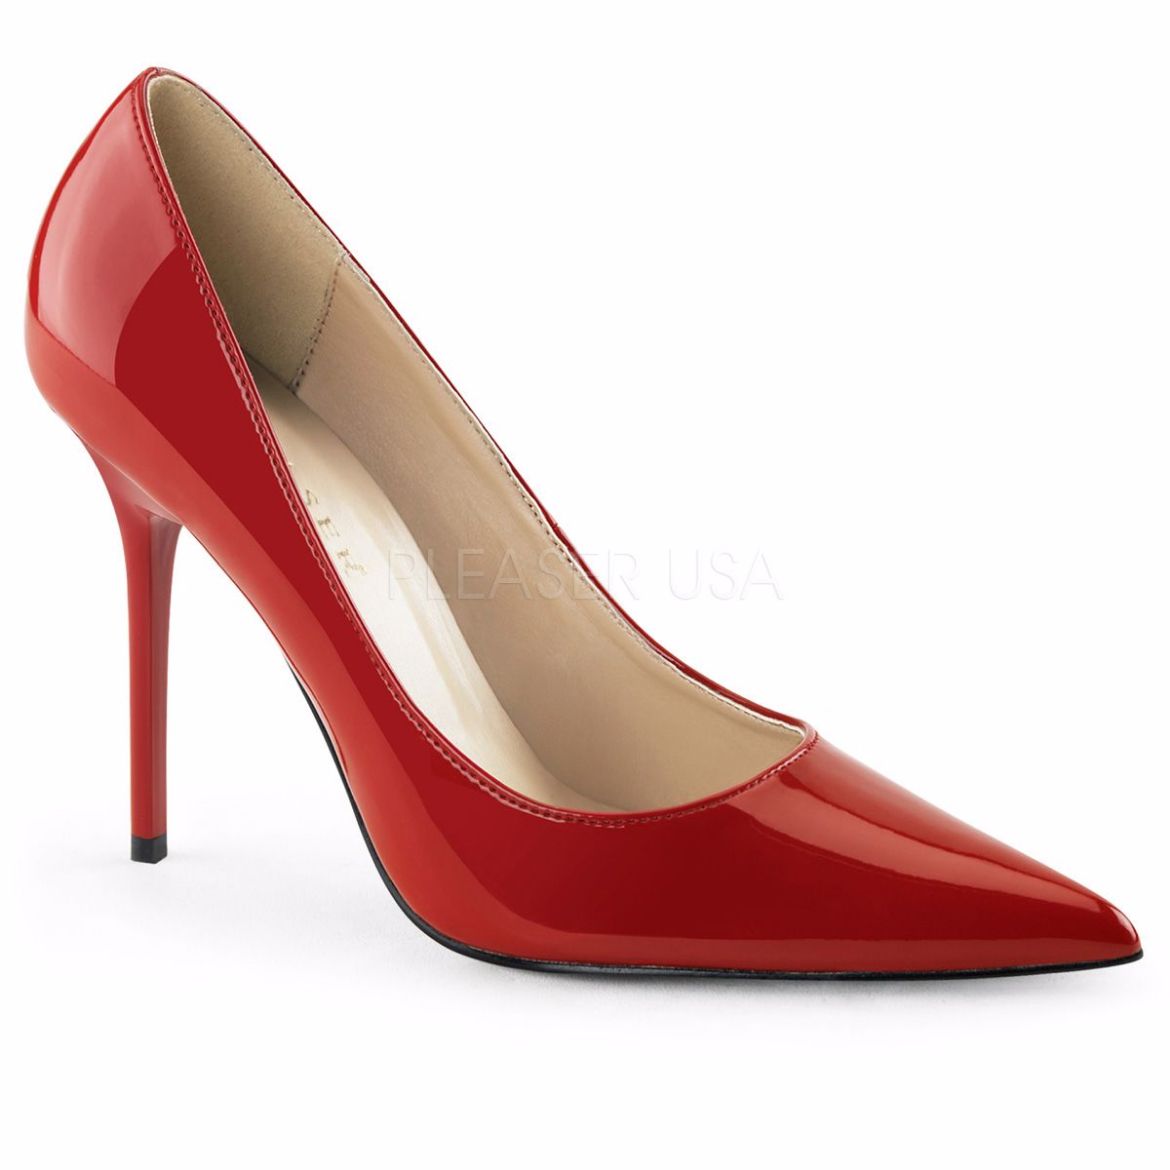 Product image of Pleaser Classique-20 Red Patent, 4 inch (10.2 cm) Heel Court Pump Shoes